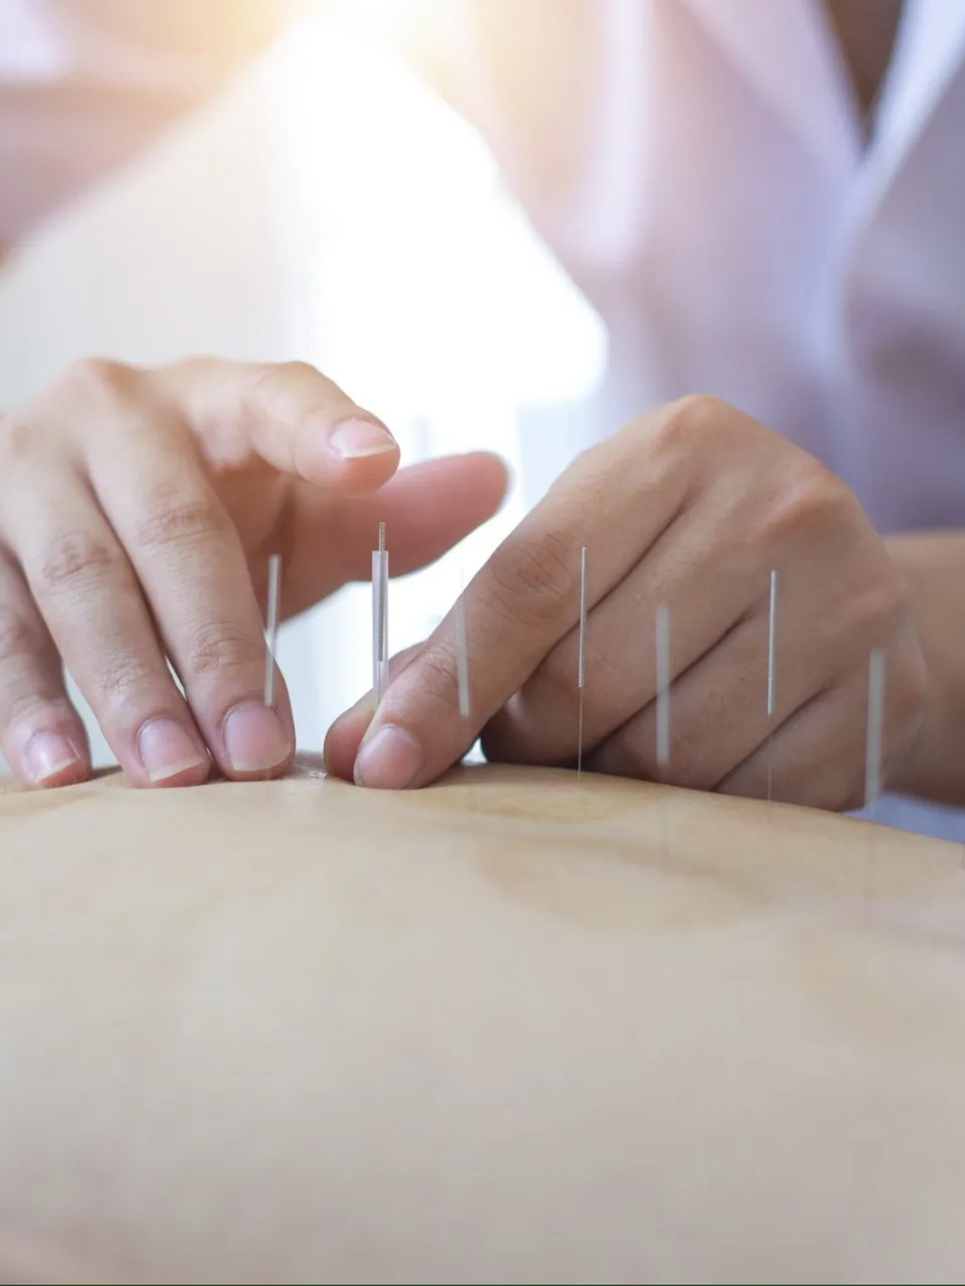 A person is getting acupuncture on their back at